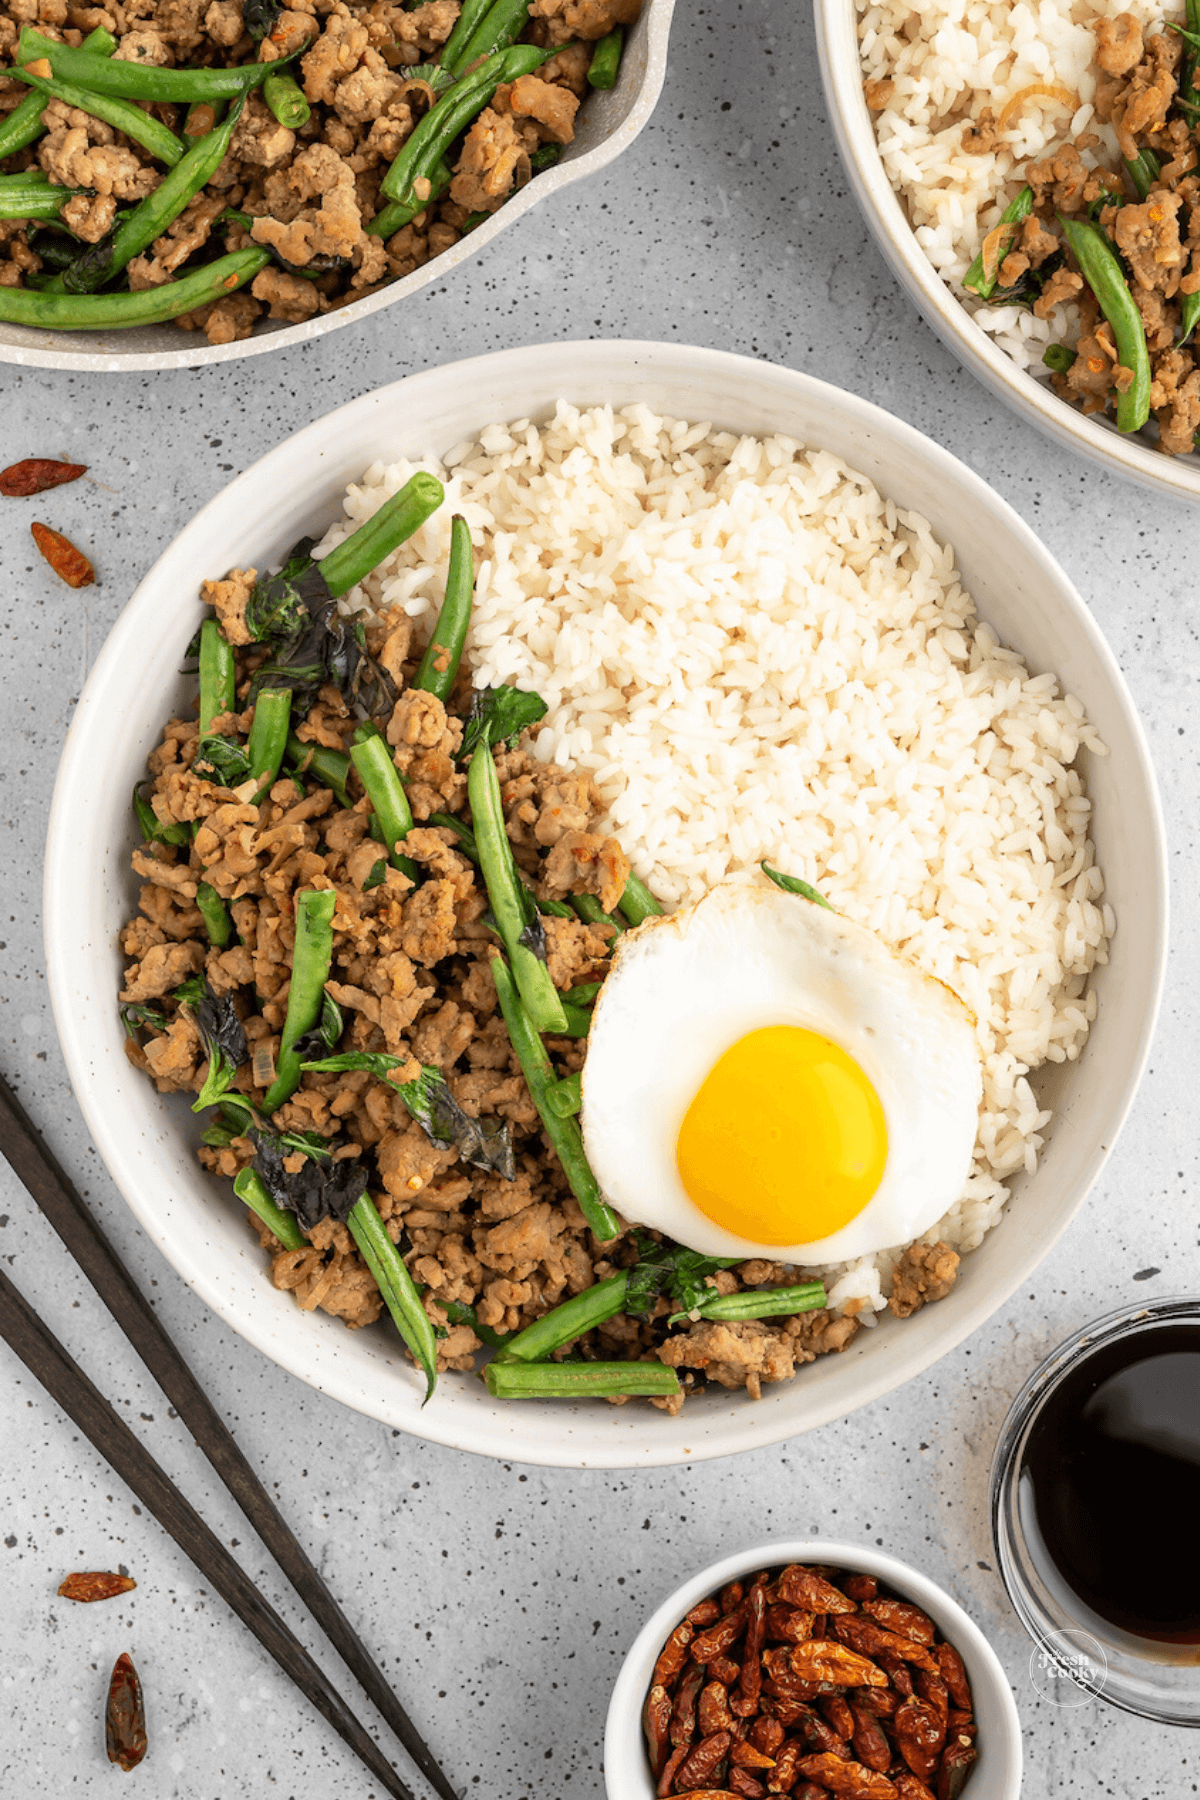 Bowl filled with ground pork stir fry, Jasmine rice, topped with Holy Basil and a Thai fried egg.